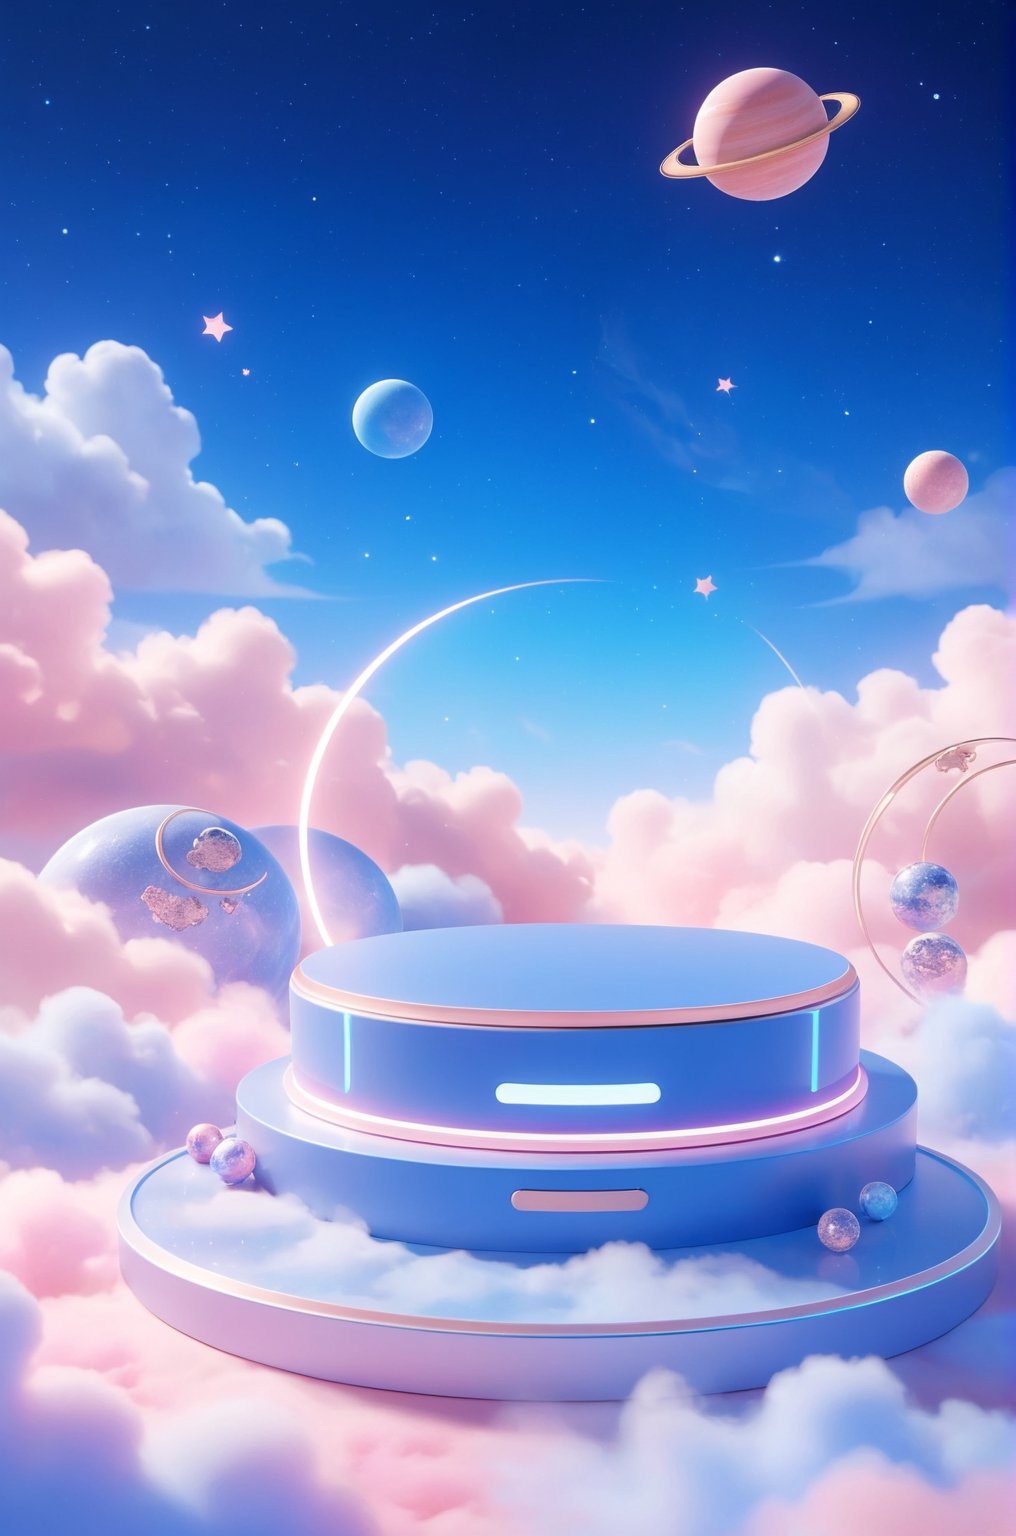 3D\(hubgstyle)\,
a round podium on the ground in the middle, cosmos theme, clouds, starry sky, planets in the sky, gradient blue and pink galaxy in the background, 

professional 3d model, anime artwork pixar, 3d style, good shine, OC rendering, highly detailed, volumetric, dramatic lighting, 